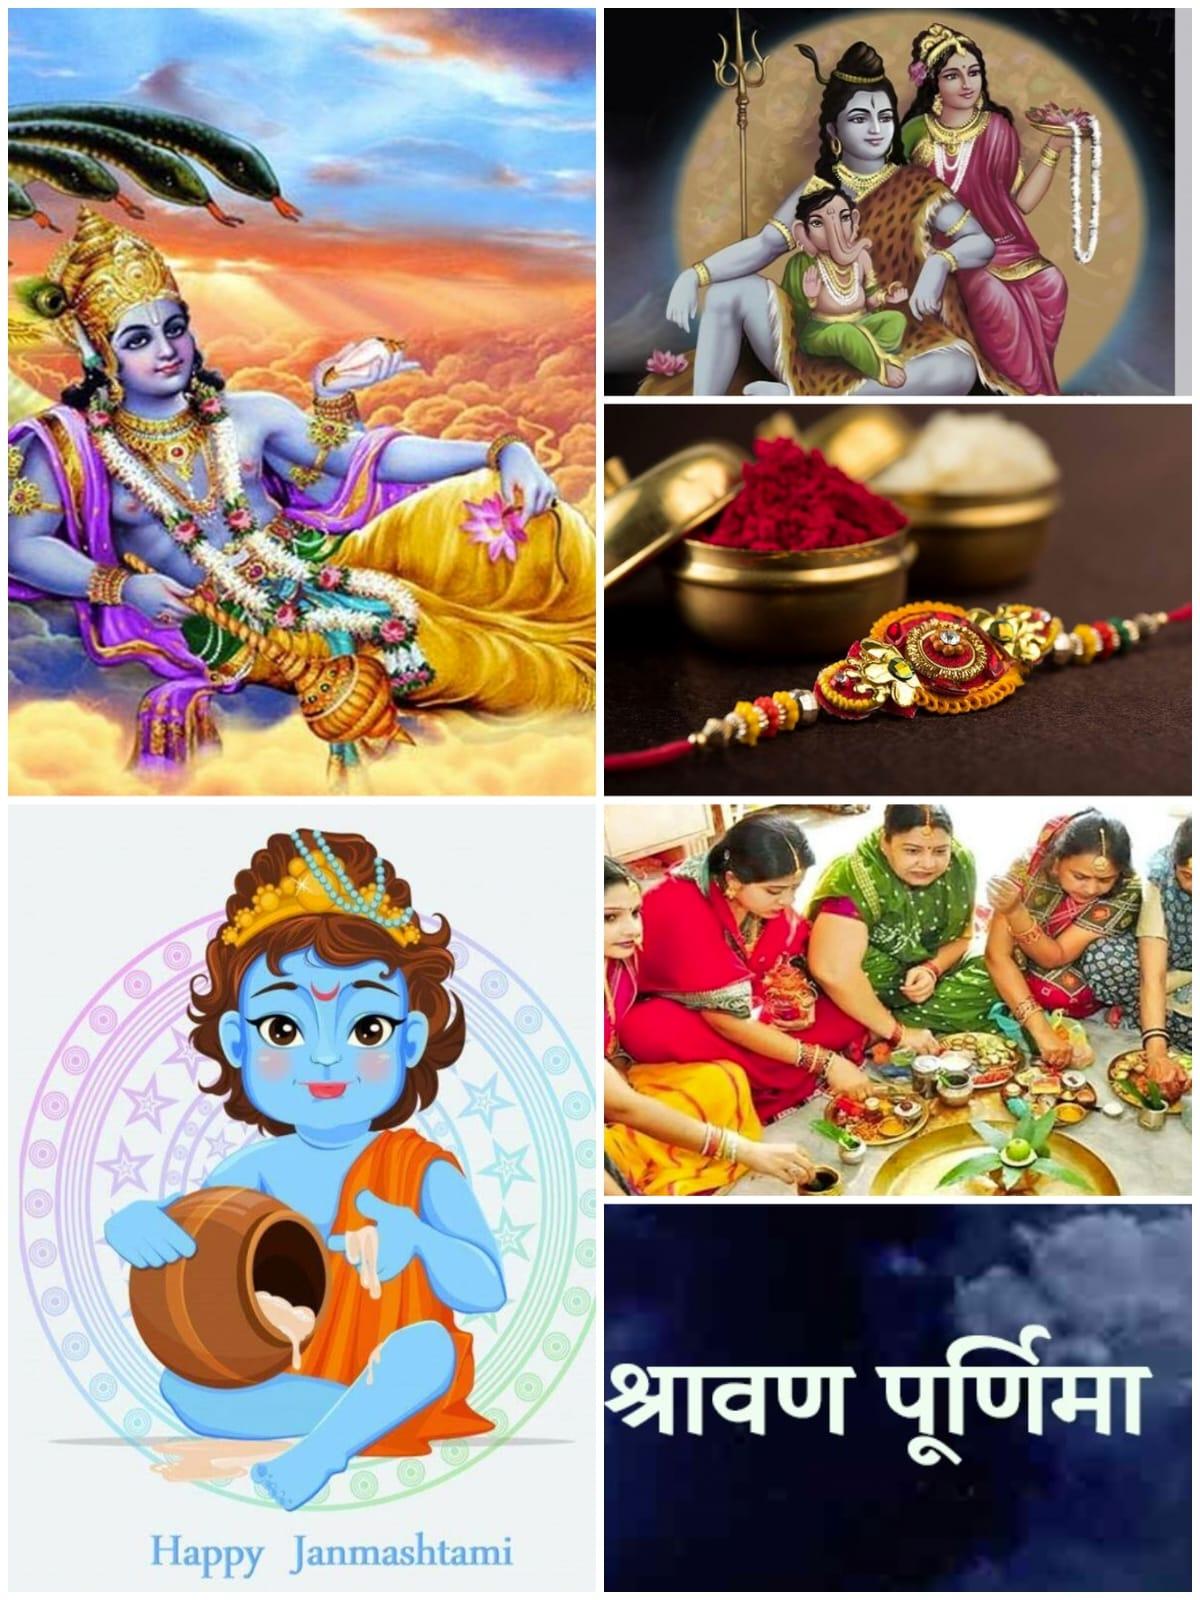 August month which festival,